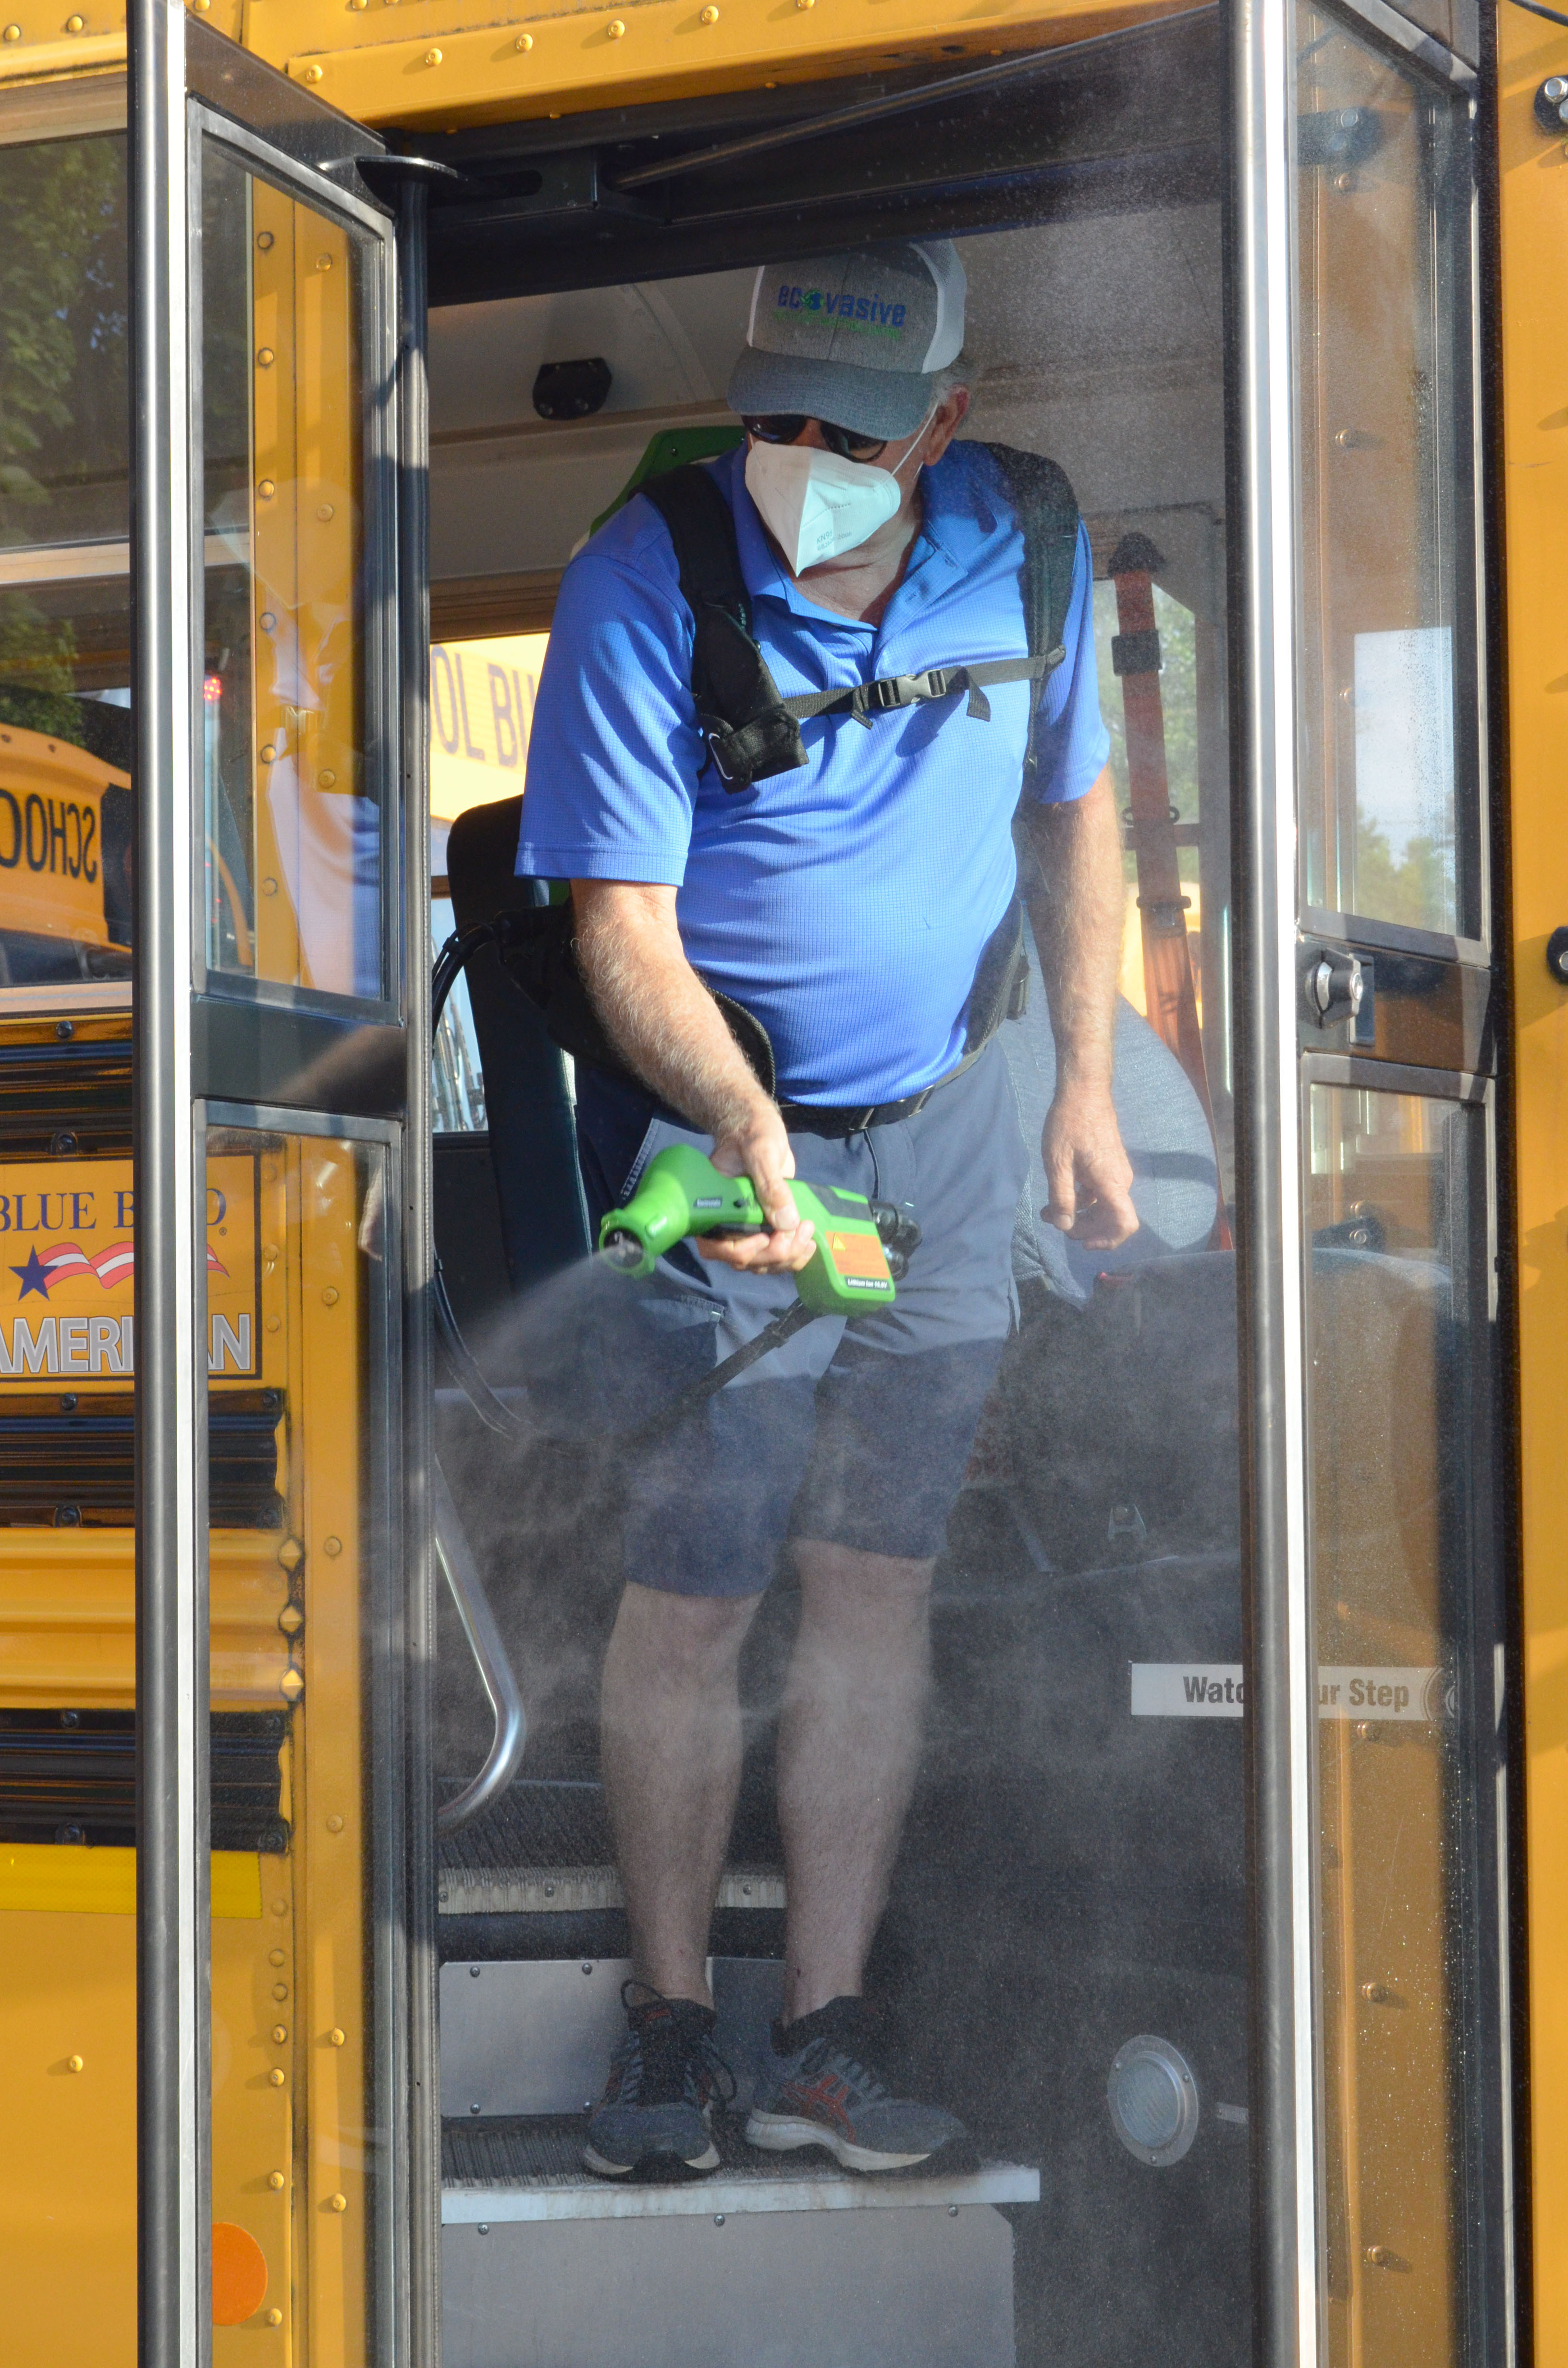 Dan Peterson with Ecovasive spays down one of the White County School buses with a solution to protect againt coronavirus on Wednesday, July 15. The application lasts 90 days, and will be reapplied every 90 days for the entire school year, said Assistant Superintendent Scott justus. (Photo/Stephanie Hill)